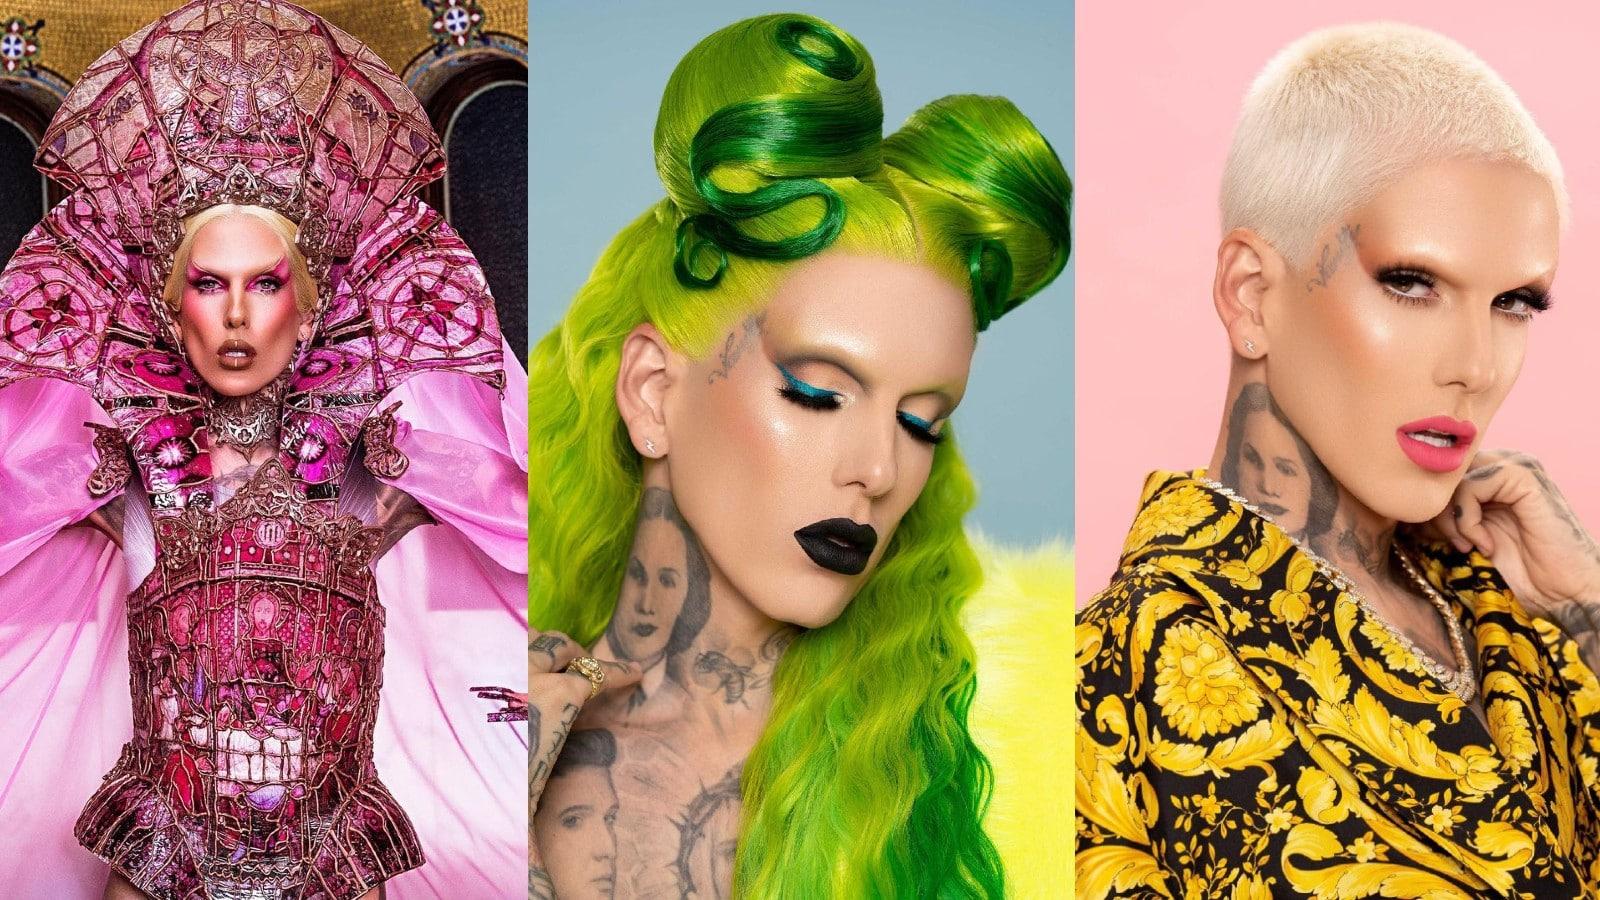 Jeffree Star explains why he's distancing himself from the beauty